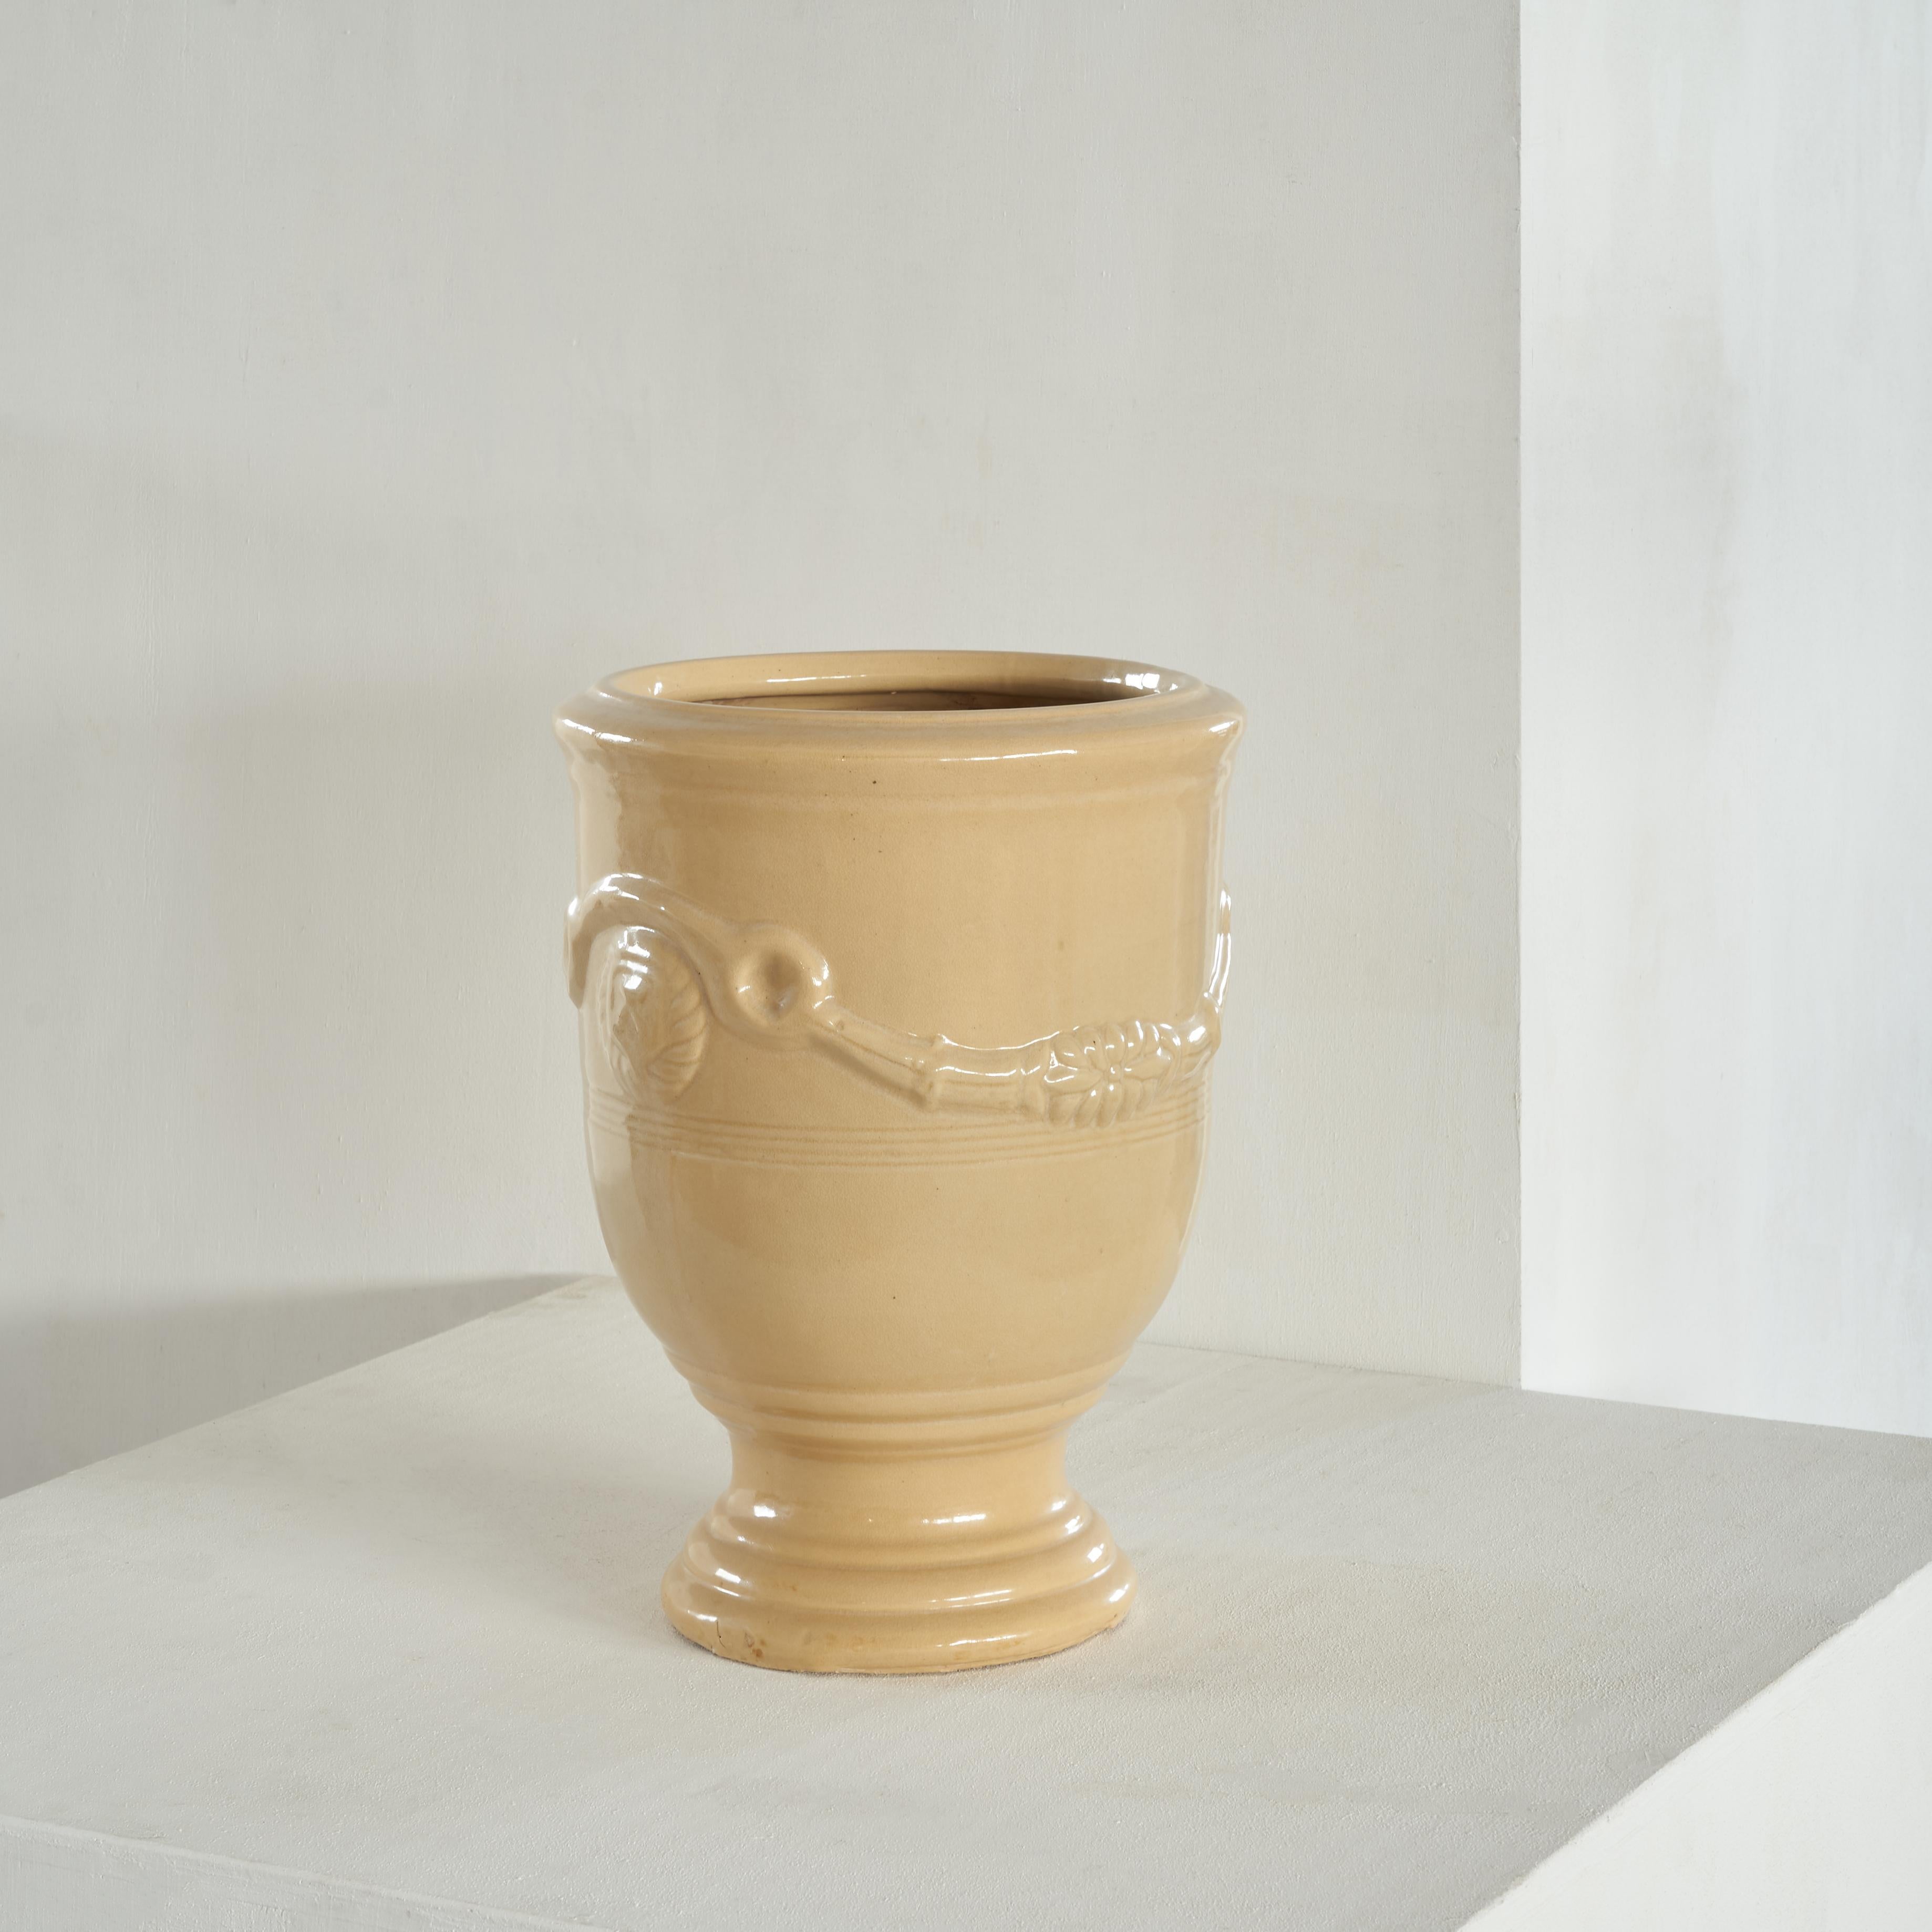 Anduze Pot in Cream Yellow, France, Mid 20th century.

This well sized Anduze pot has a warm cream yellow color and a glazed surface, showing a rich high gloss. The proportions of this original piece are well chosen, it has a firm yet elegant